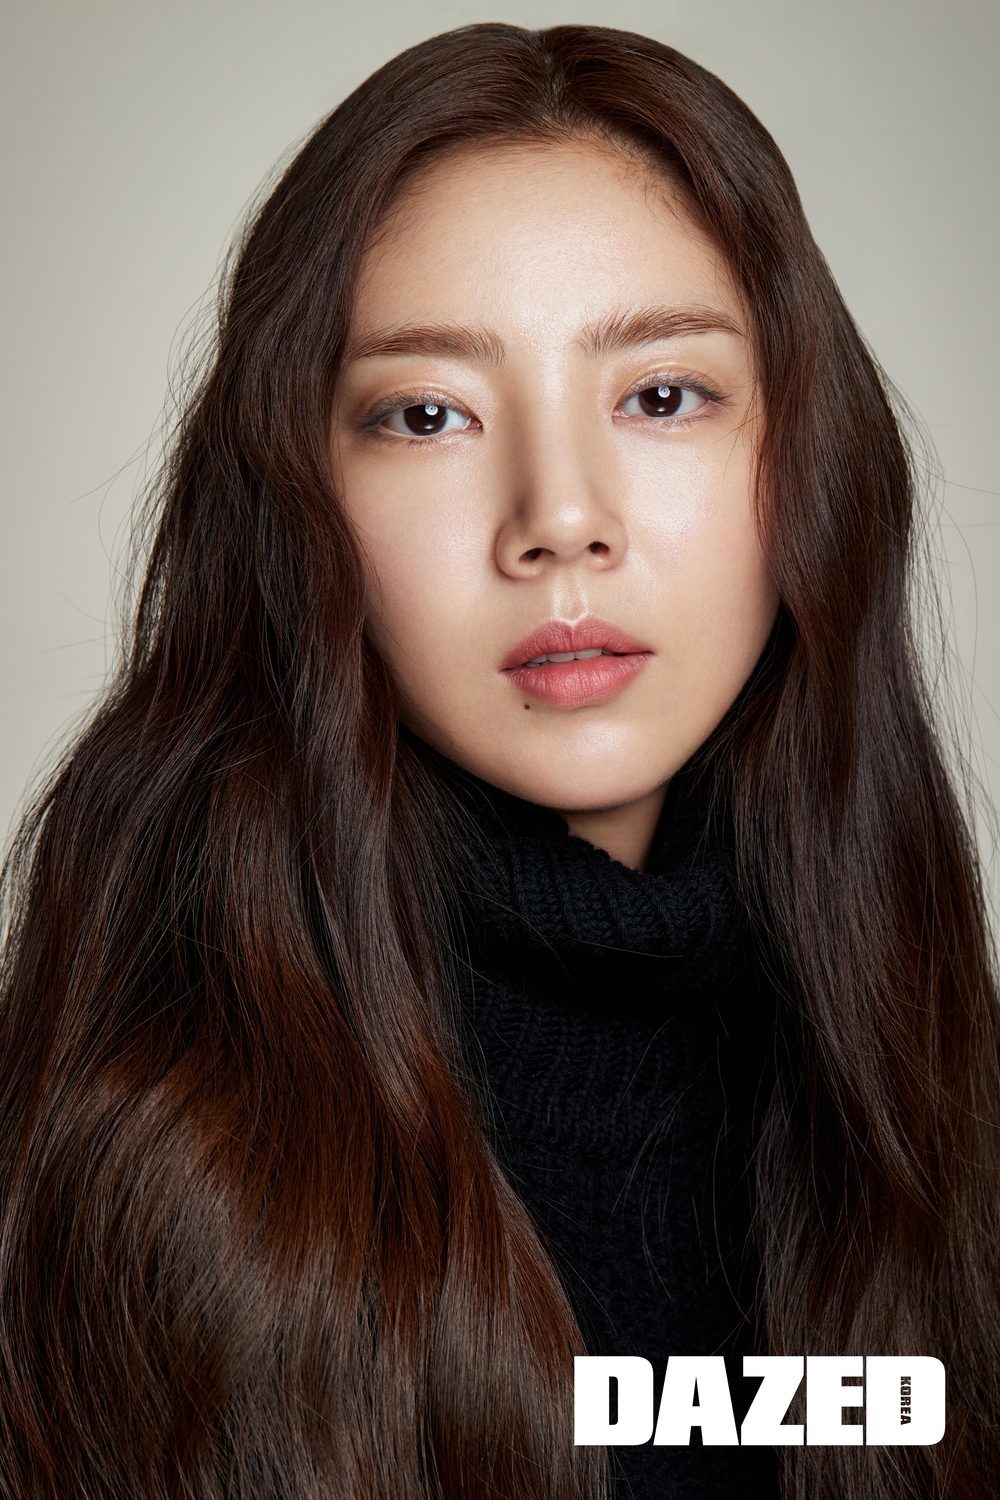 A sensational makeup picture of Singer and actor Son Dam-bi has been released.Magazine Days released a beauty pictorial of Son Dam-bi with a makeup brand on October 26.Son Dam-bi in the picture showed four colorful makeup look that is good for autumn and winter with various products including high lighting concealer and lipstick.Nutral look, which shows sleek and subtle base makeup, as well as The Holiday party look, you can get a glimpse of the colorful makeup look that has been hard to see from her these days.Singer Son showed off his glamor as if he had returned to the Dam-bi days.Park Su-in